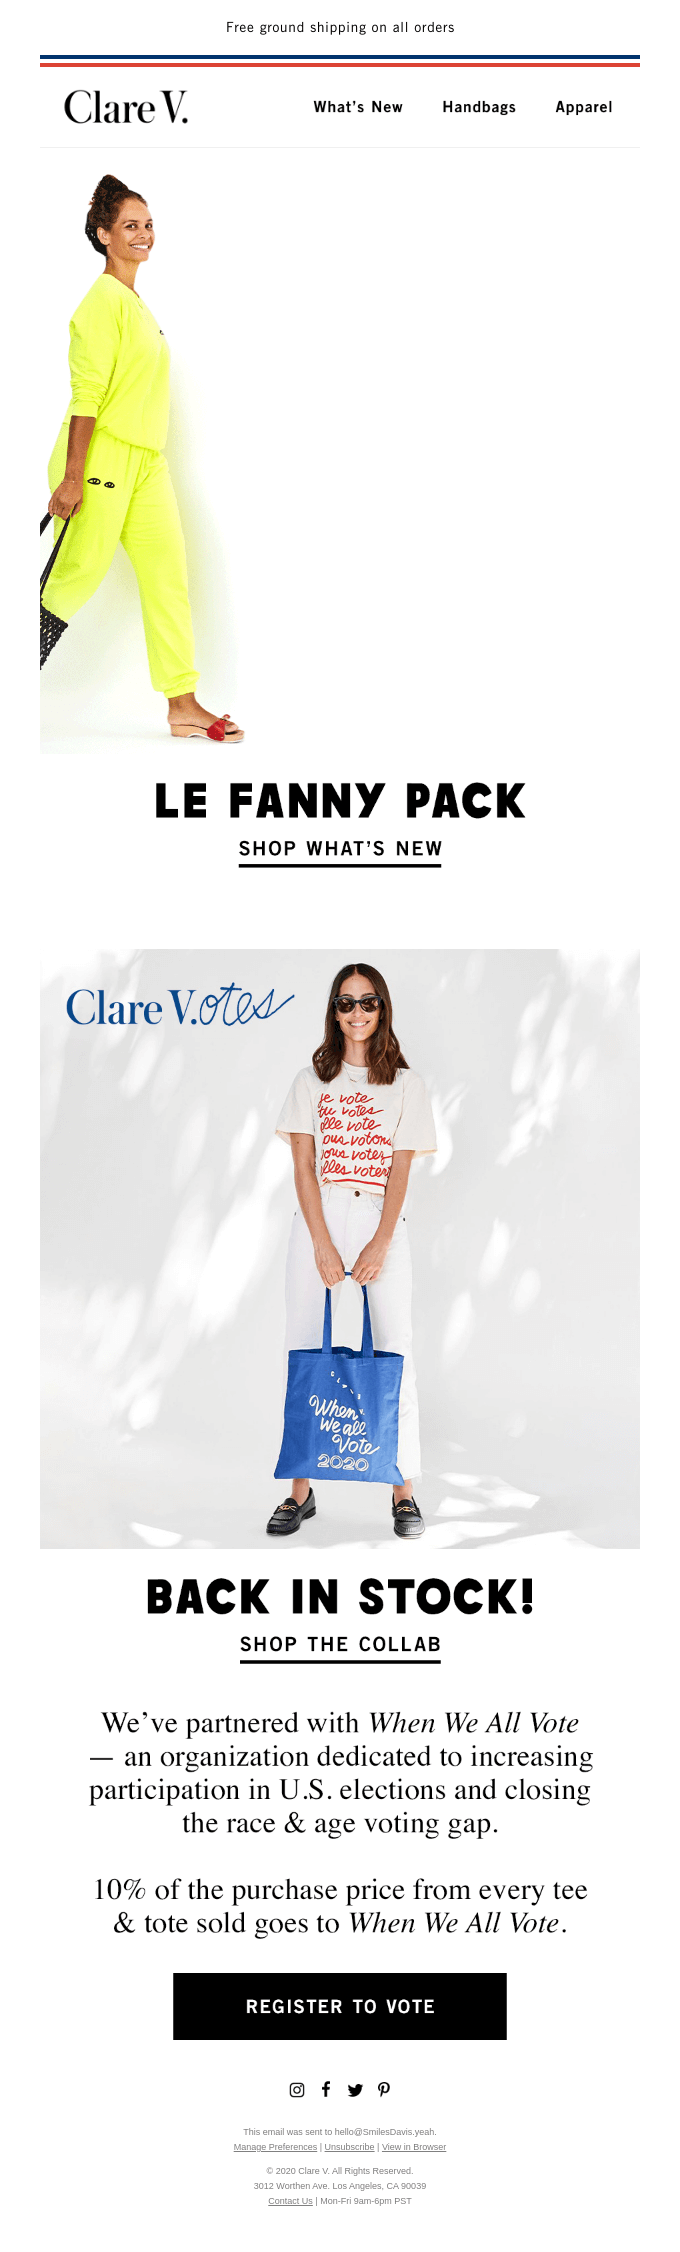 Clare V. use vote as their subliminal message in email marketing